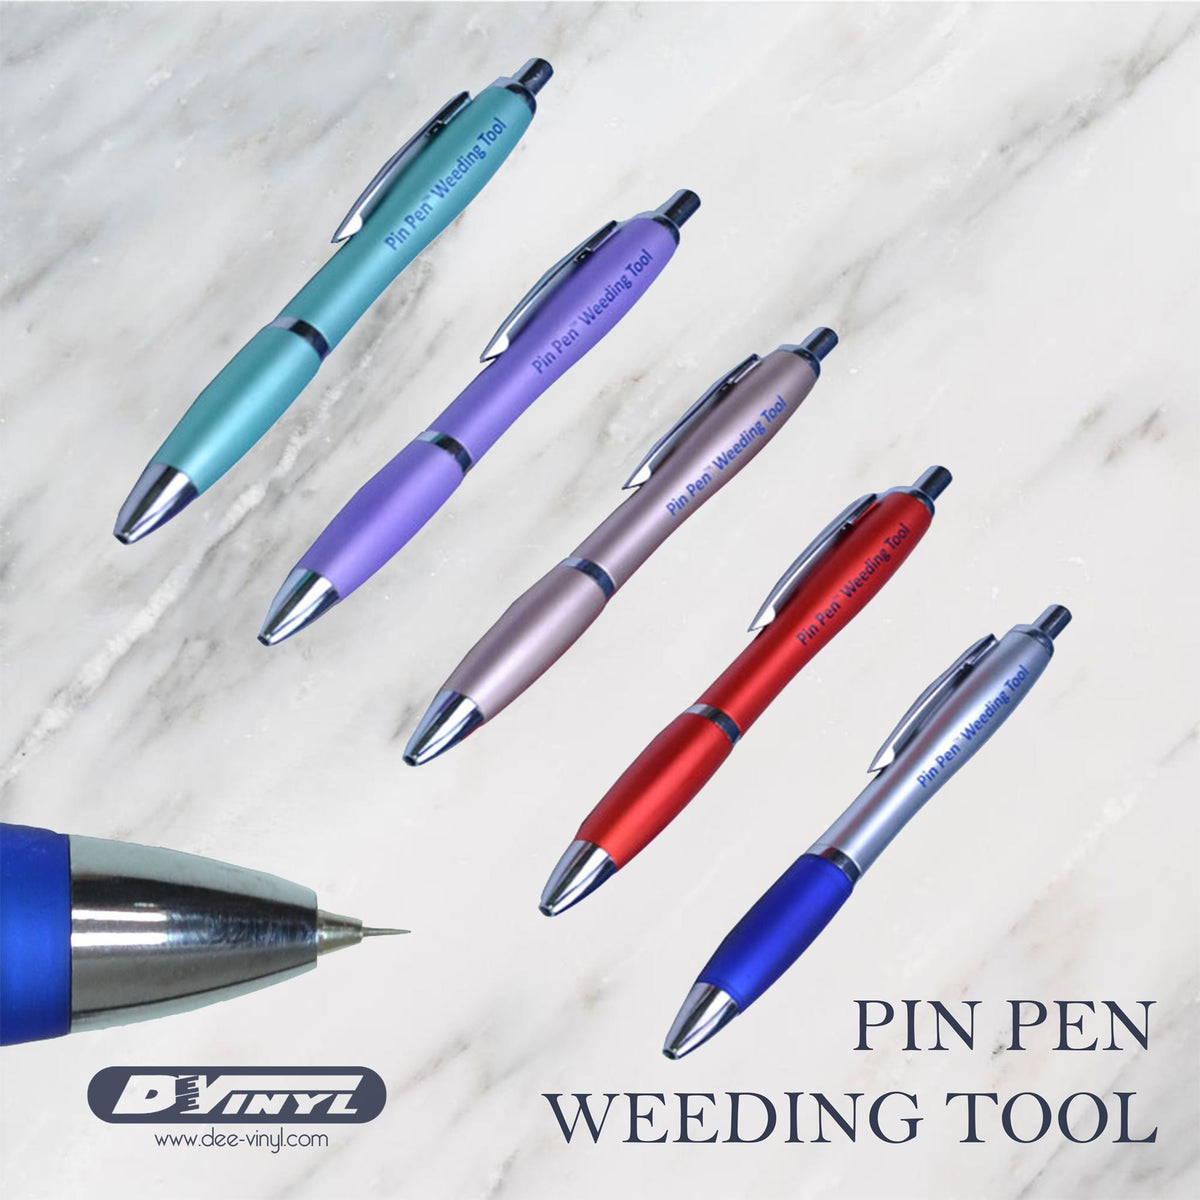 NEWISHTOOL 2 Pcs Blue Weeding Pen for Vinyl, Point Retractable Pin Pen, Pin Pen Weeding Tool for Easy Craft Weeding and Vinyl Air Releas